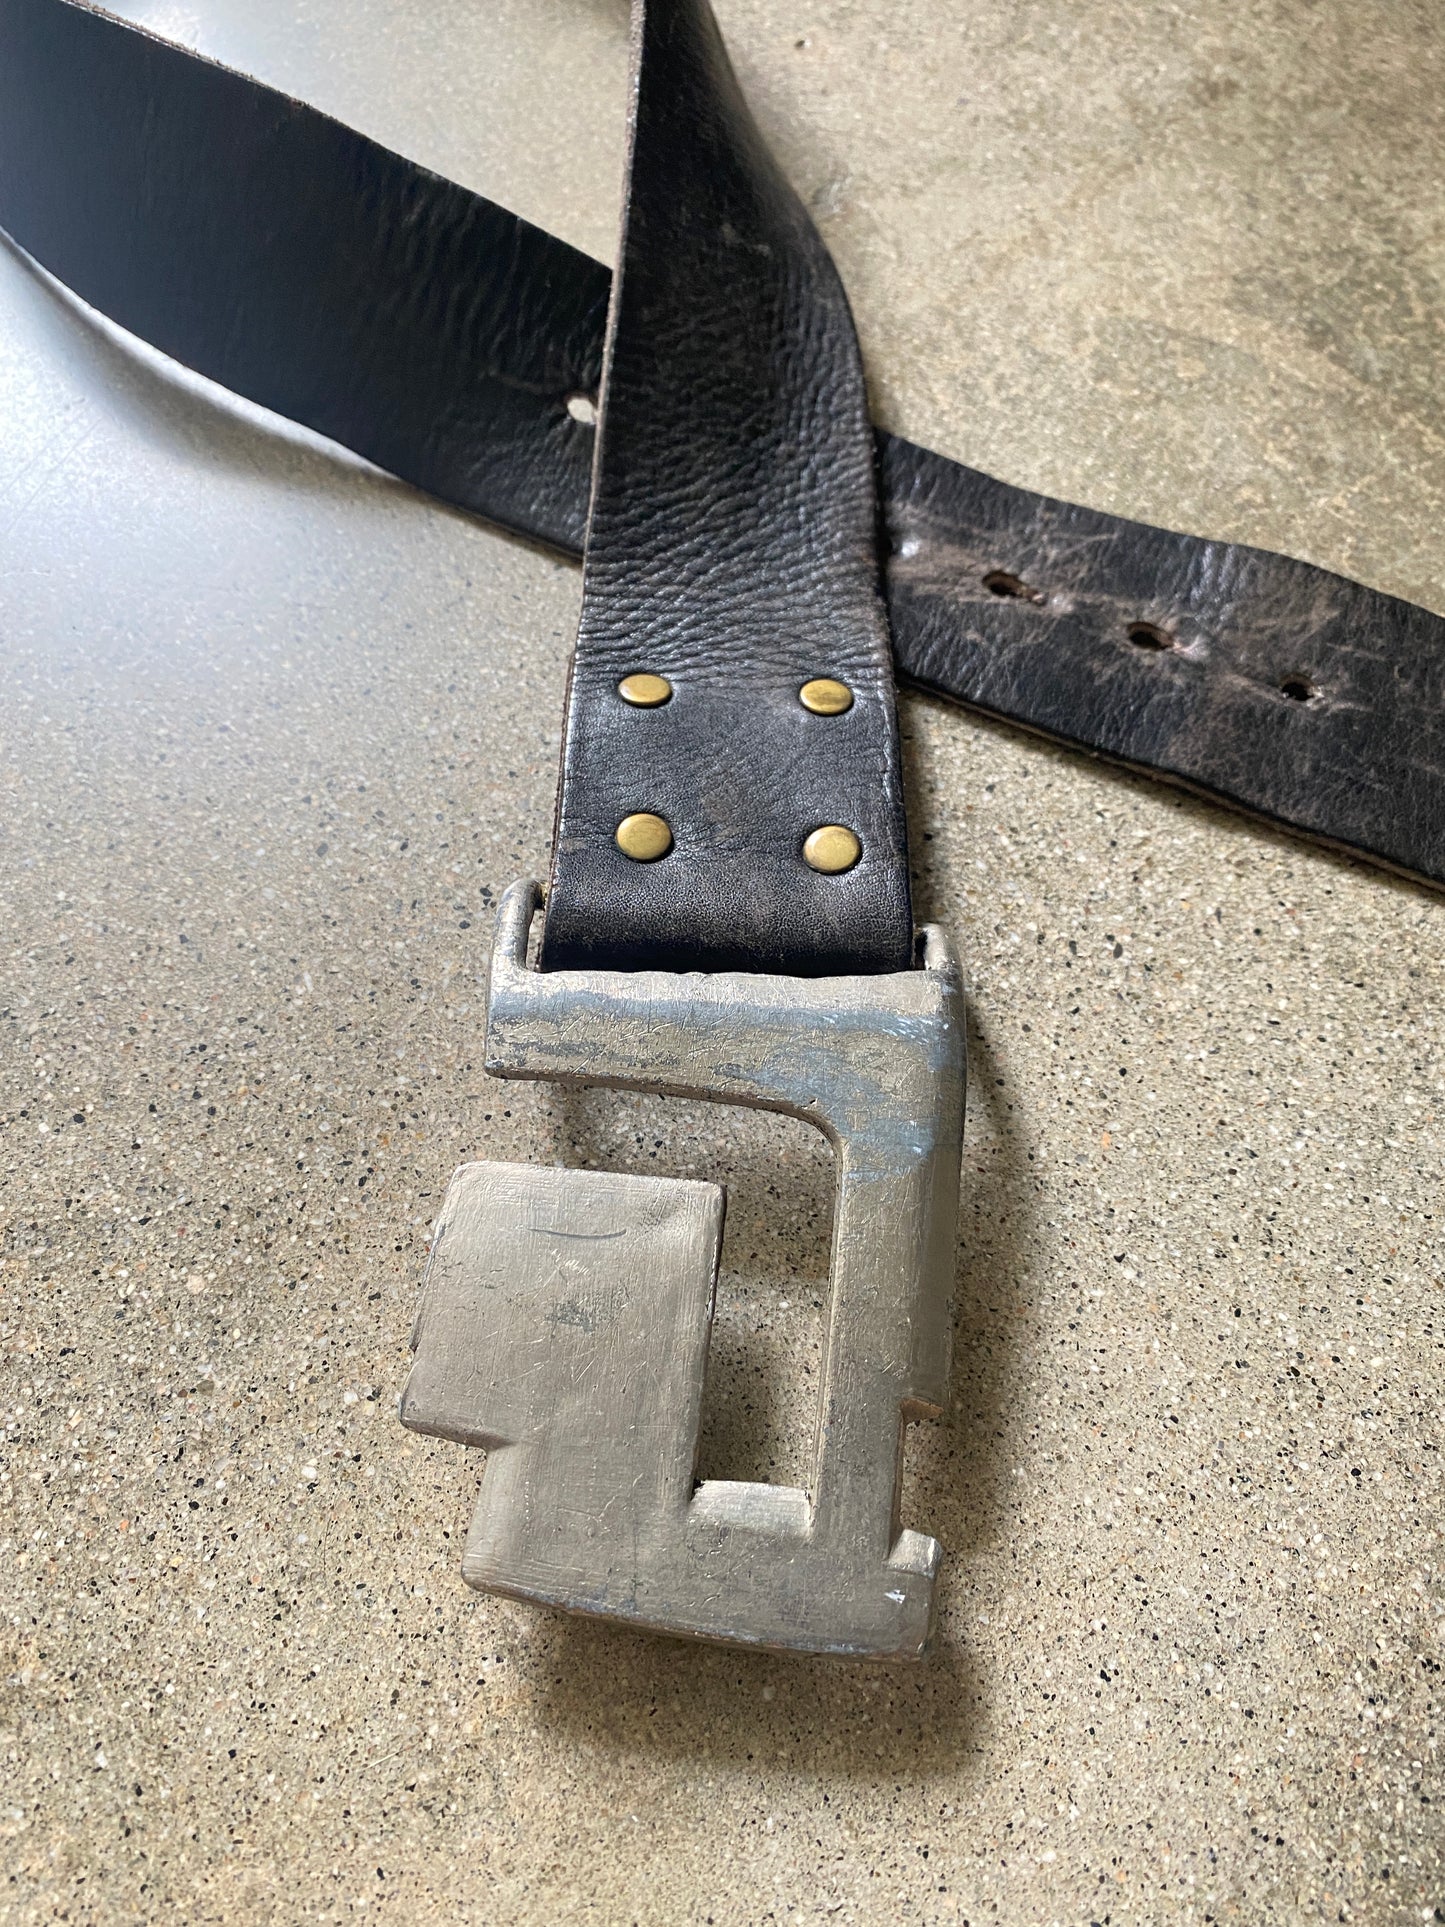 90’s Abstract Metal Leather Belt